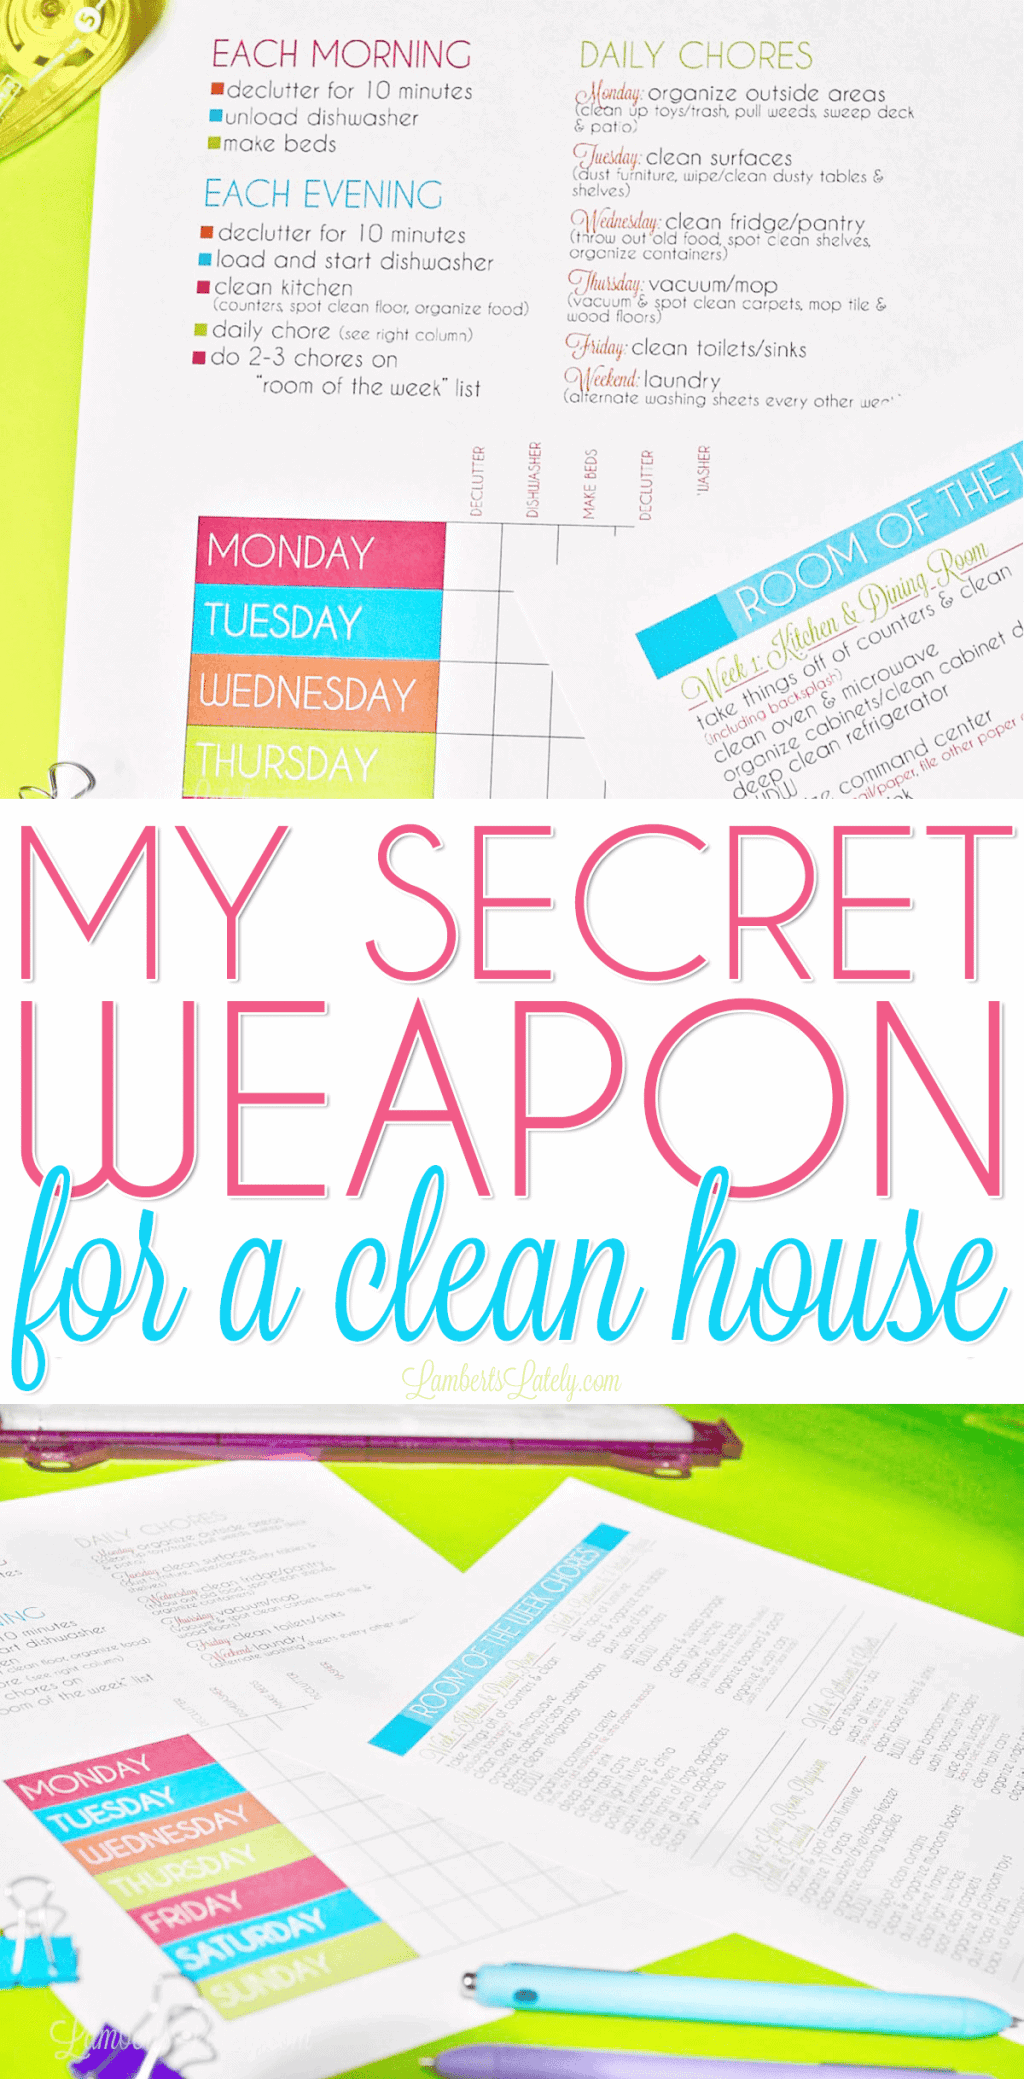 This is an awesome free printable cleaning schedule checklist! I love the bright colors and the fact that it is for both a working mom and a stay at home mom. This template makes weekly/daily cleaning so simple!